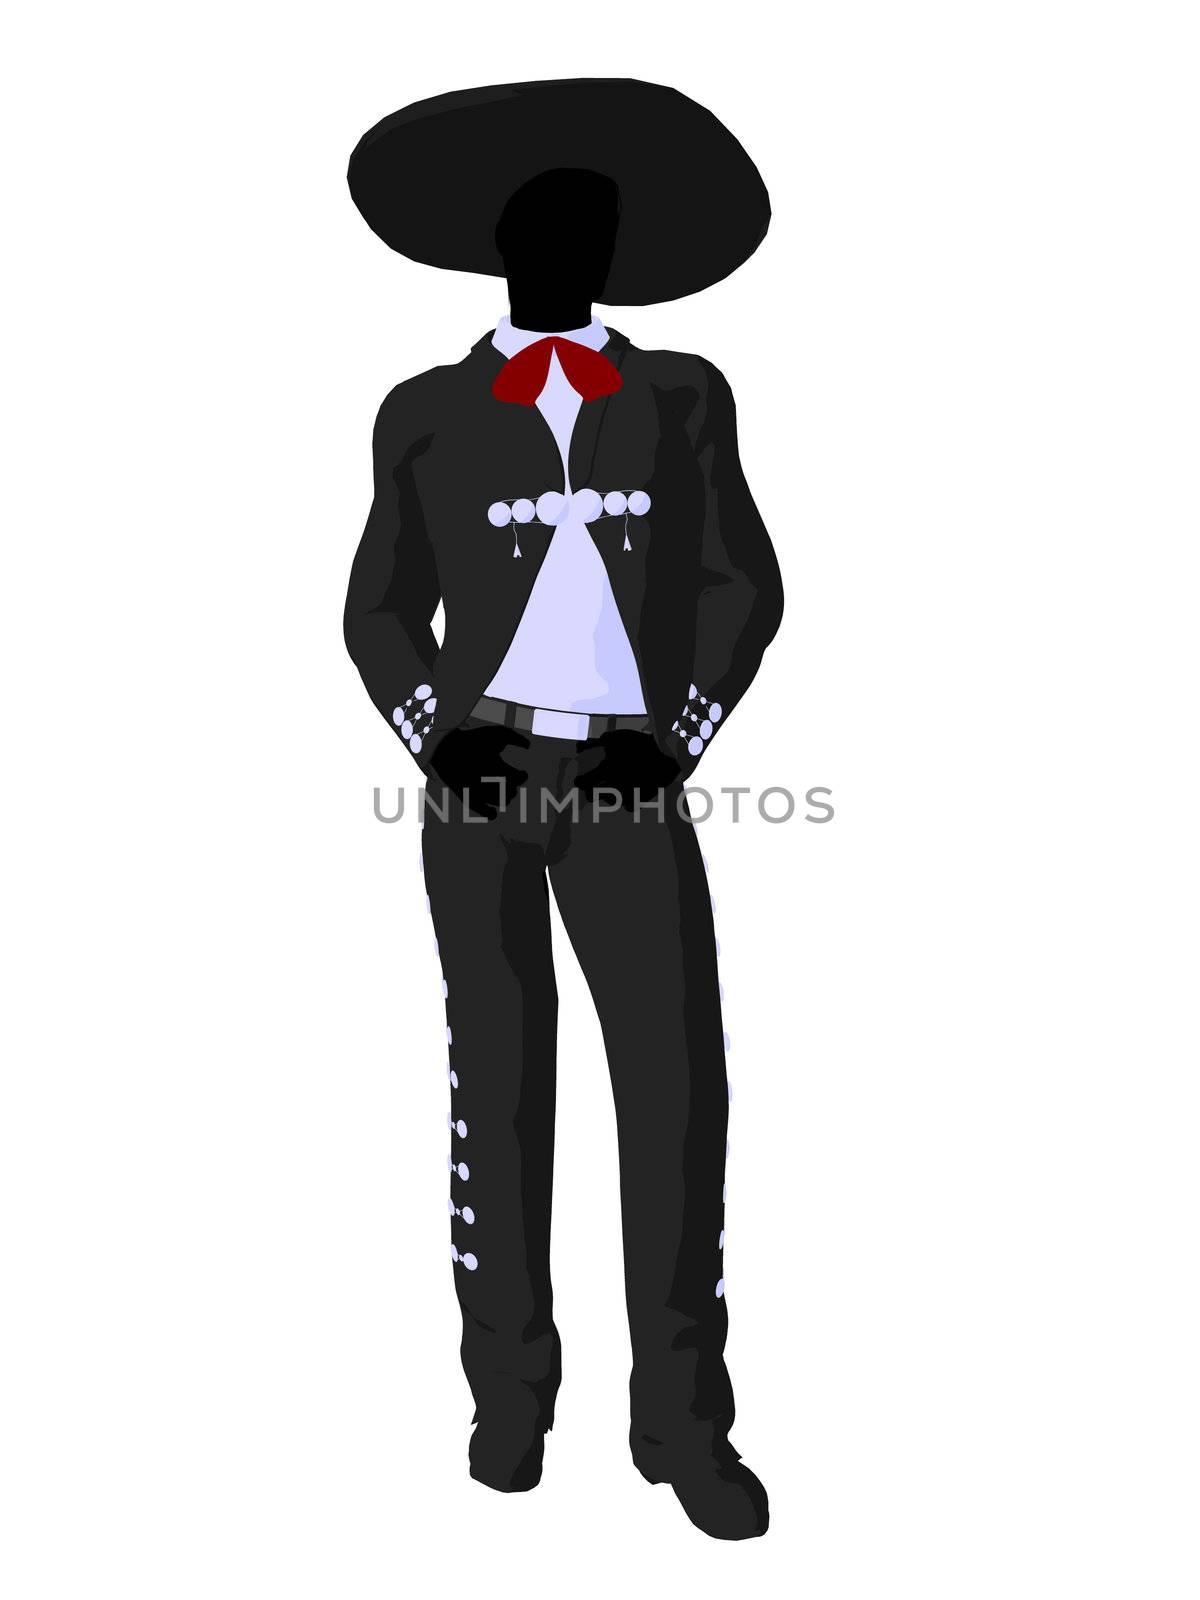 Male mariachi illustration silhouette illustration on a white background